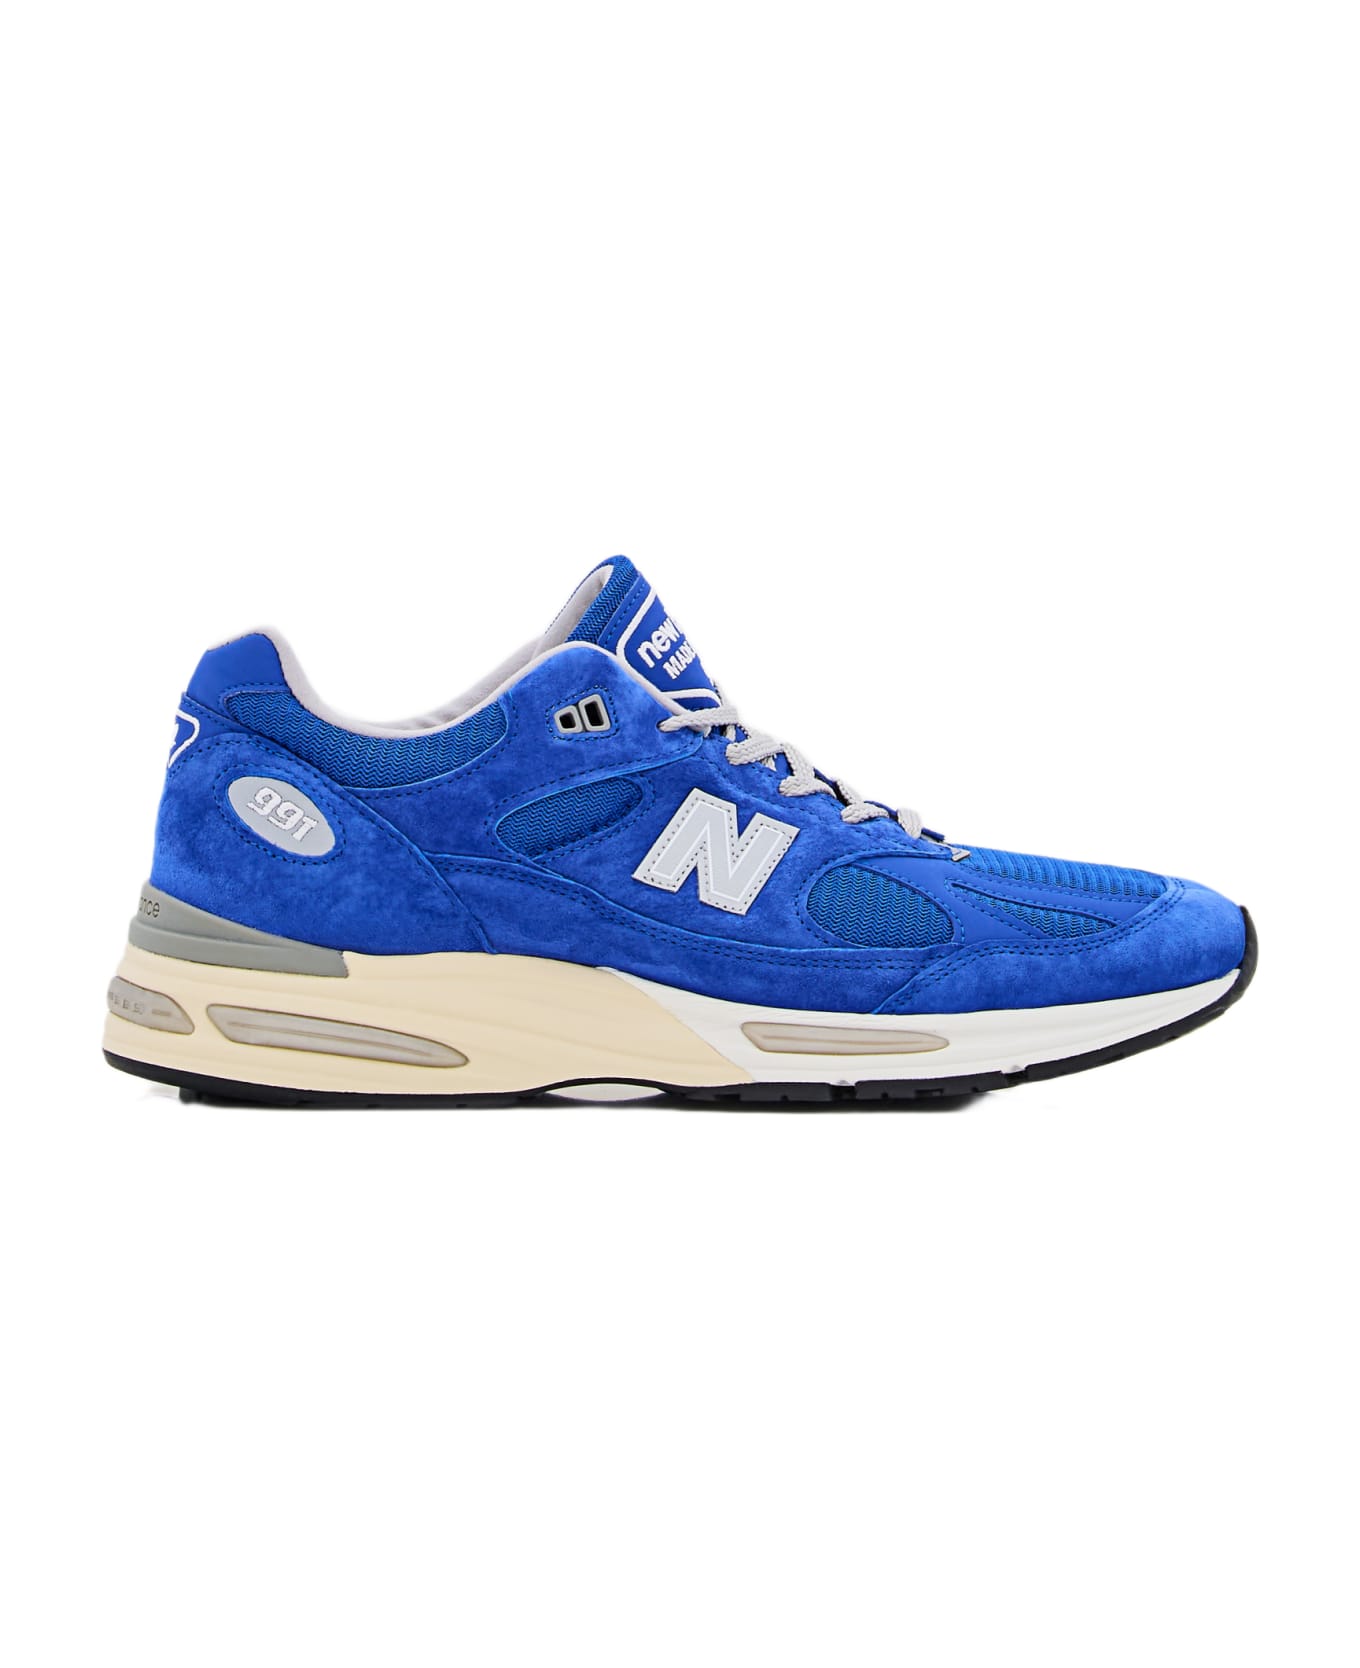 New Balance 991 Sneakers Made In Uk - Blue